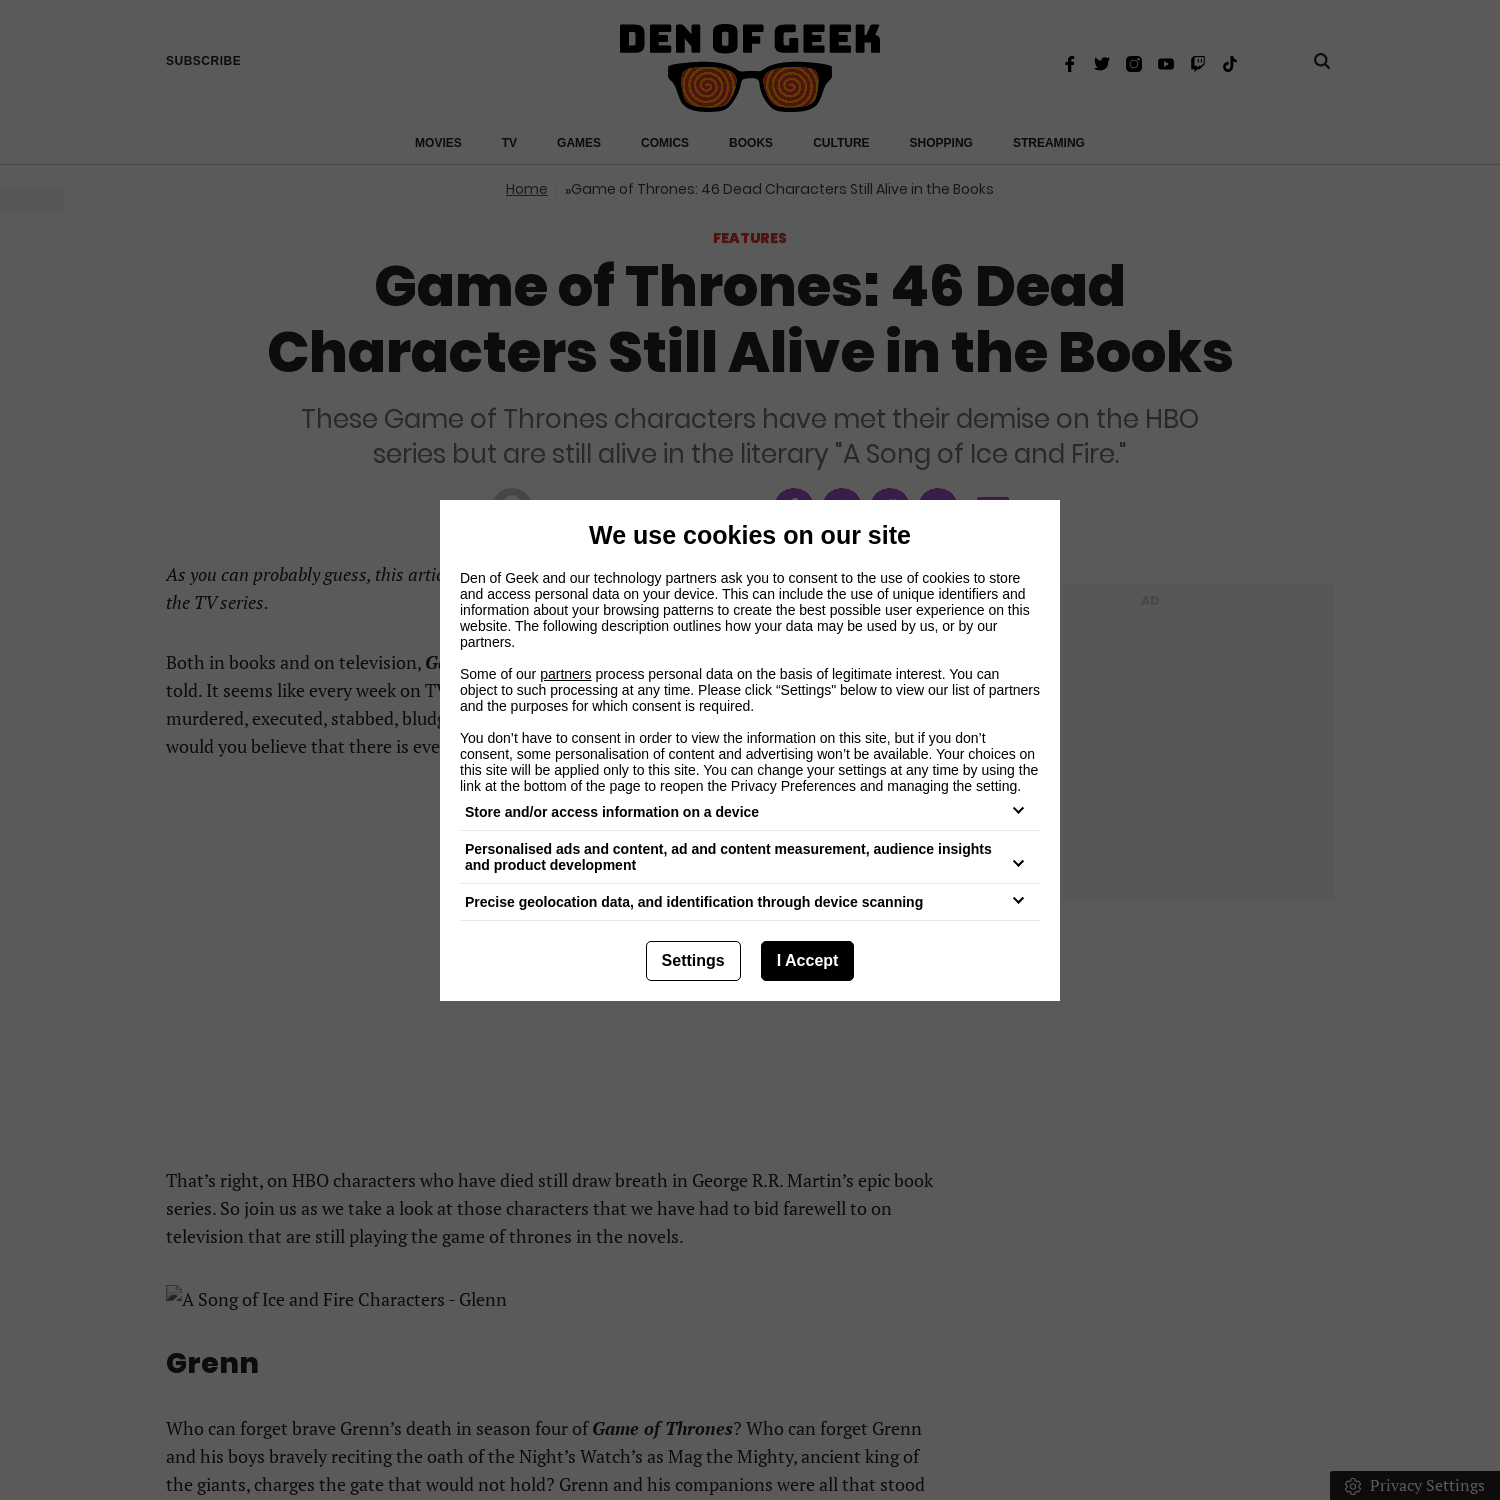 Game of Thrones: 46 Dead Characters Still Alive in the Books